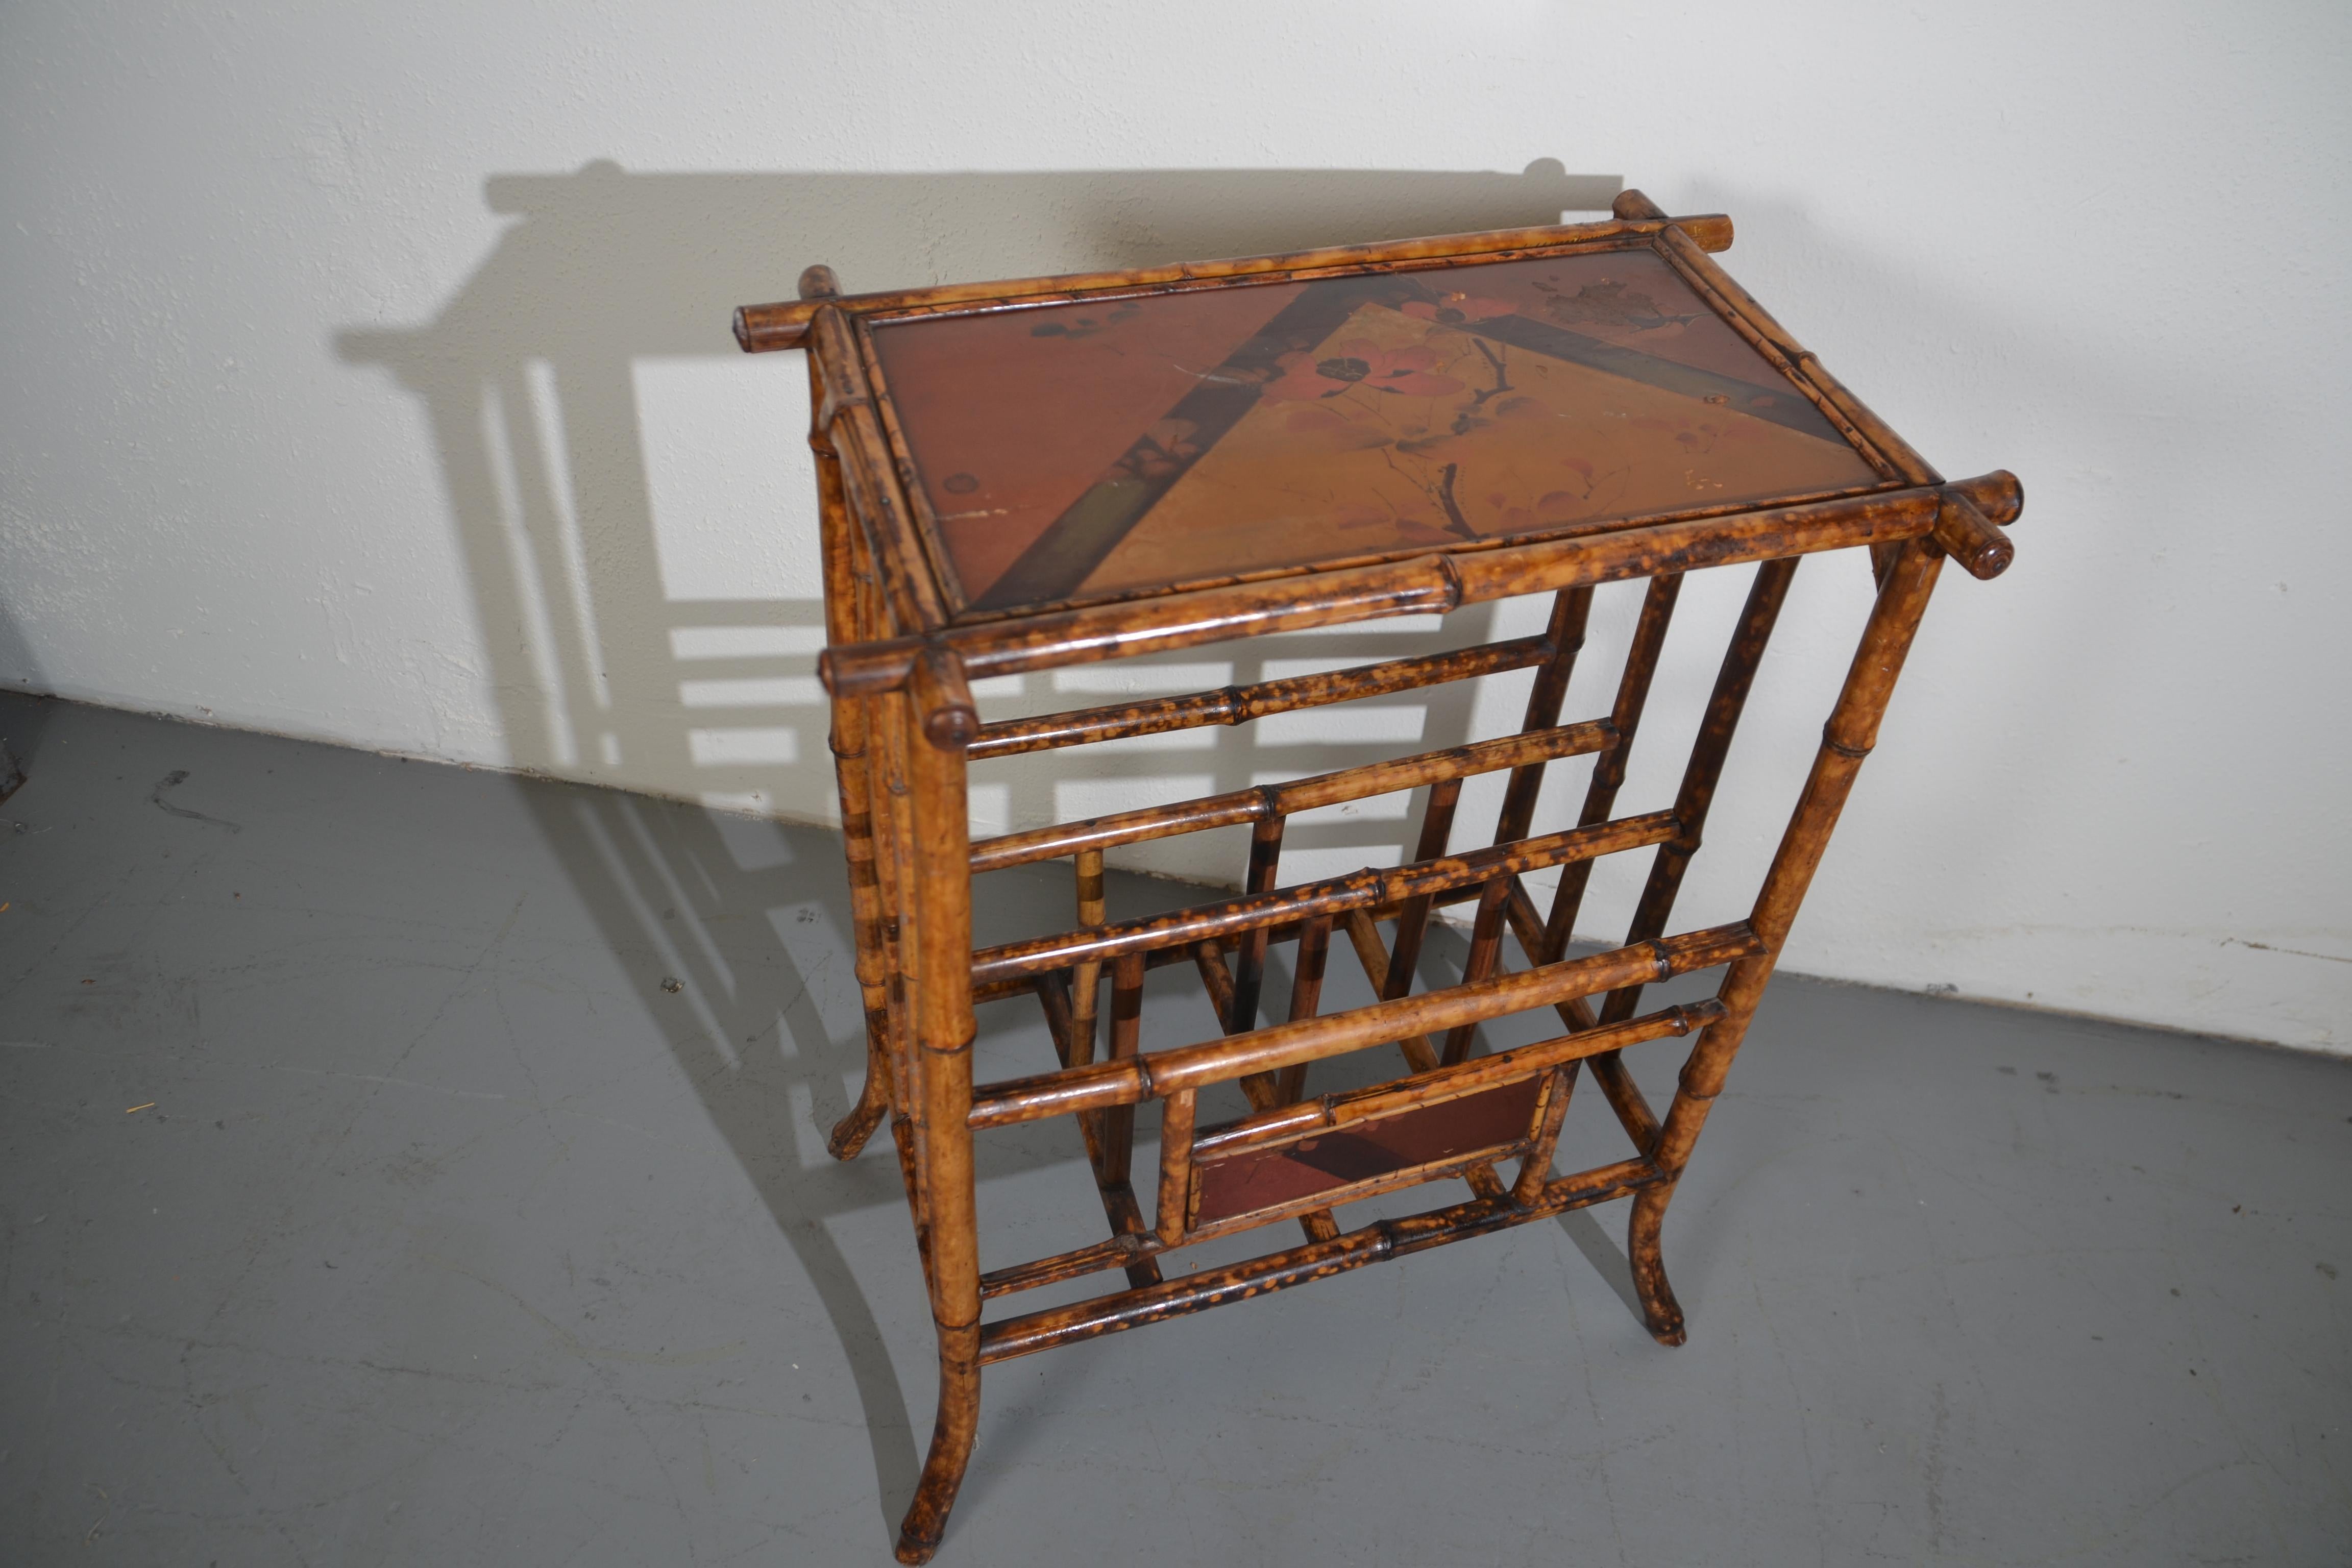 19th Century Bamboo accent table with storage racks below. The racks are the perfect size for magazines and other media.